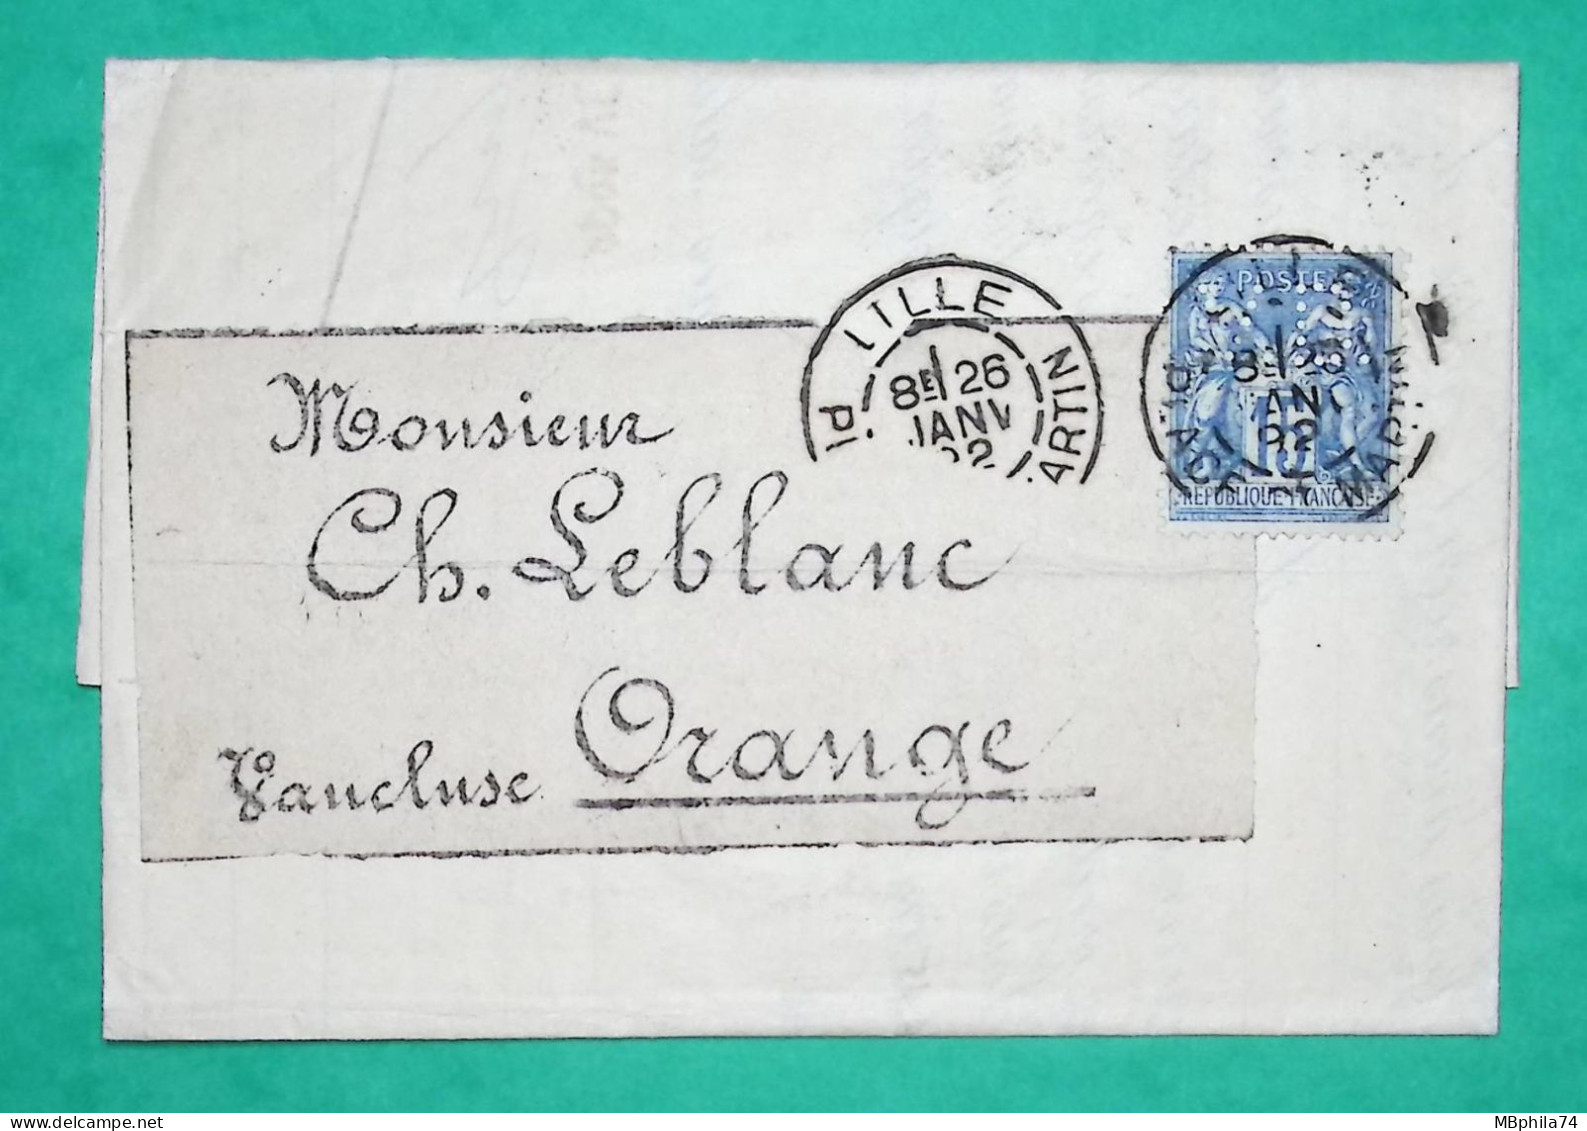 N°90 SAGE PERFORE VD VERLEY DECROIX LILLE NORD POUR ORANGE VAUCLUSE 1892 LETTRE COVER FRANCE - Covers & Documents